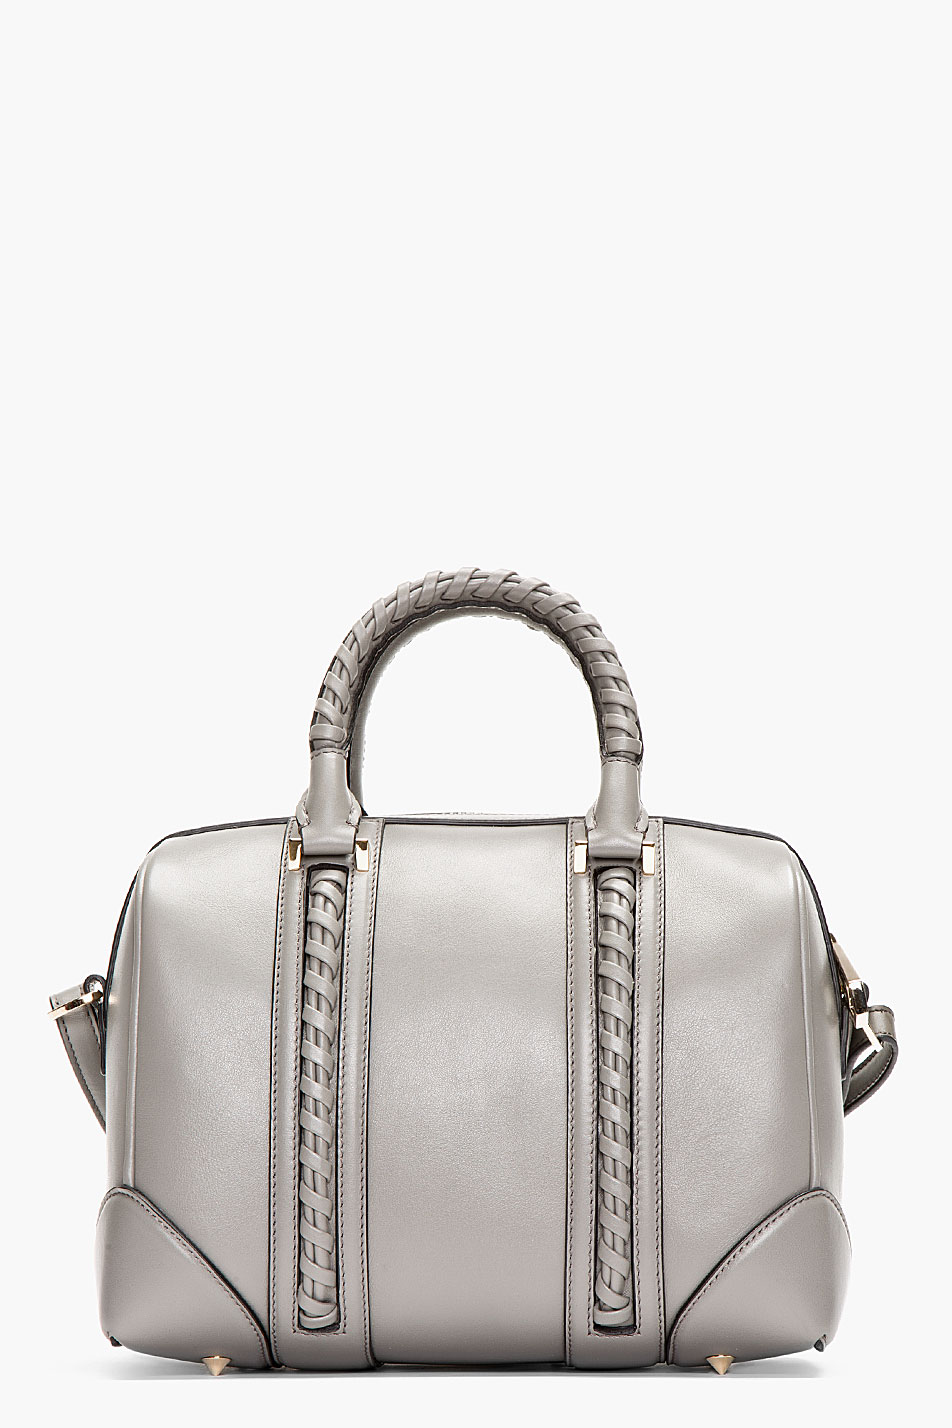 Lyst - Givenchy Grey Braided Leather Lucrezia Small Duffle Bag in Gray